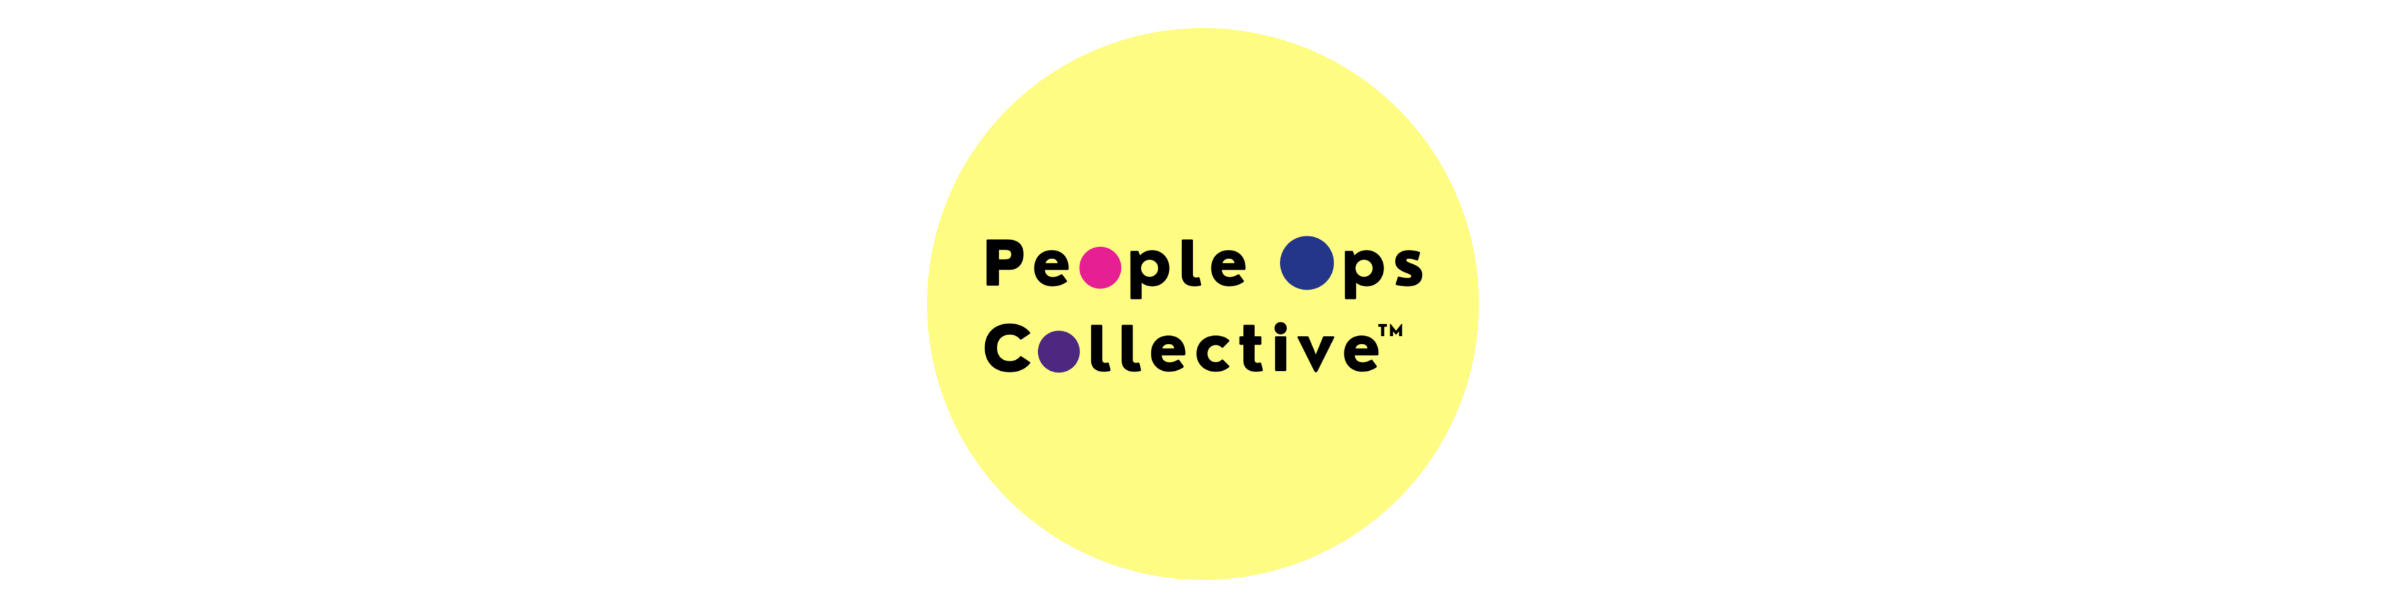 People Ops Collective logo